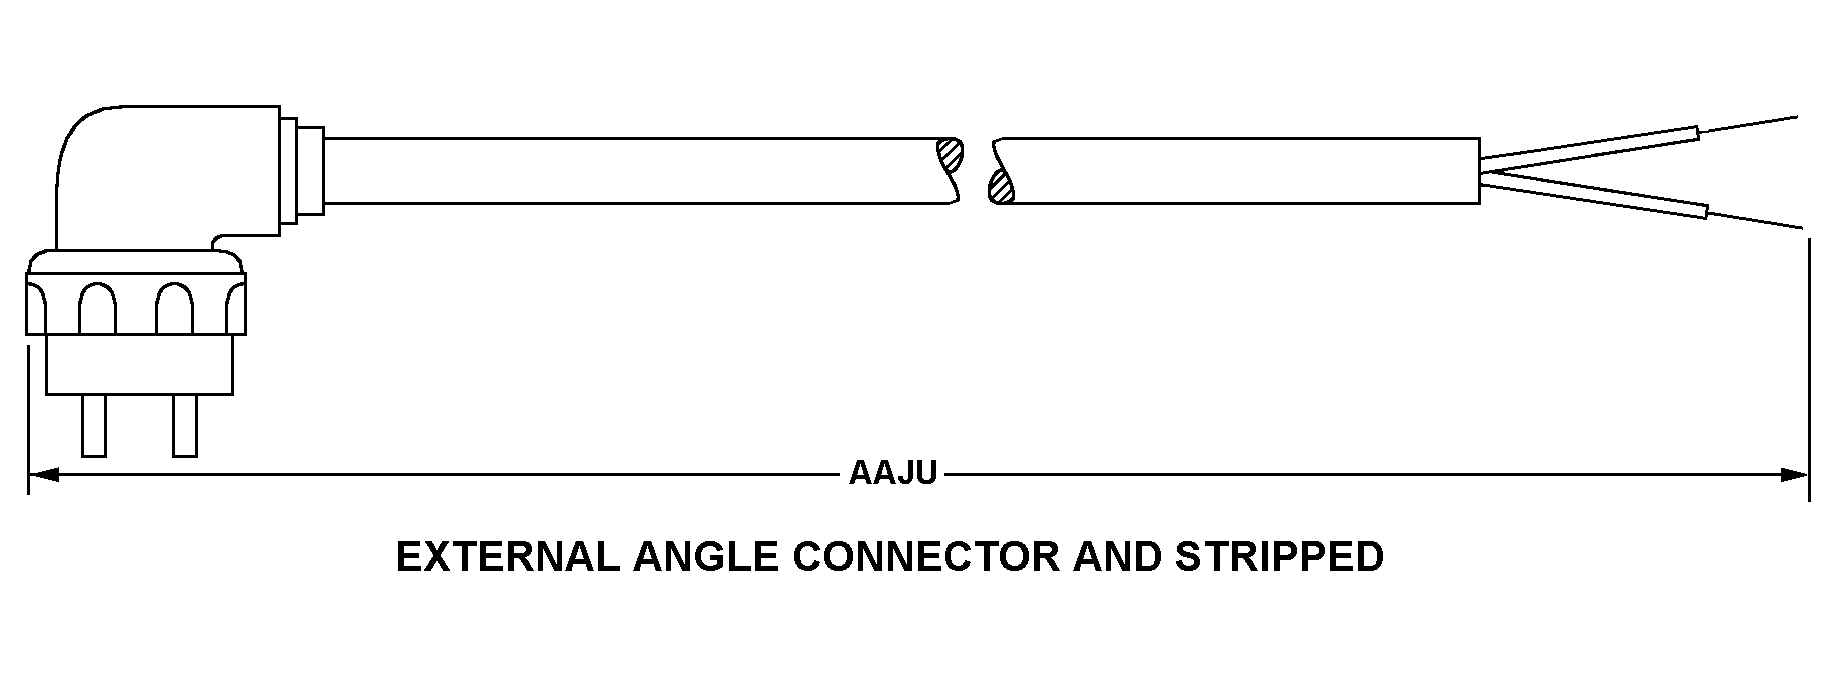 EXTERNAL ANGLE CONNECTOR AND STRIPPED style nsn 5995-01-190-4770